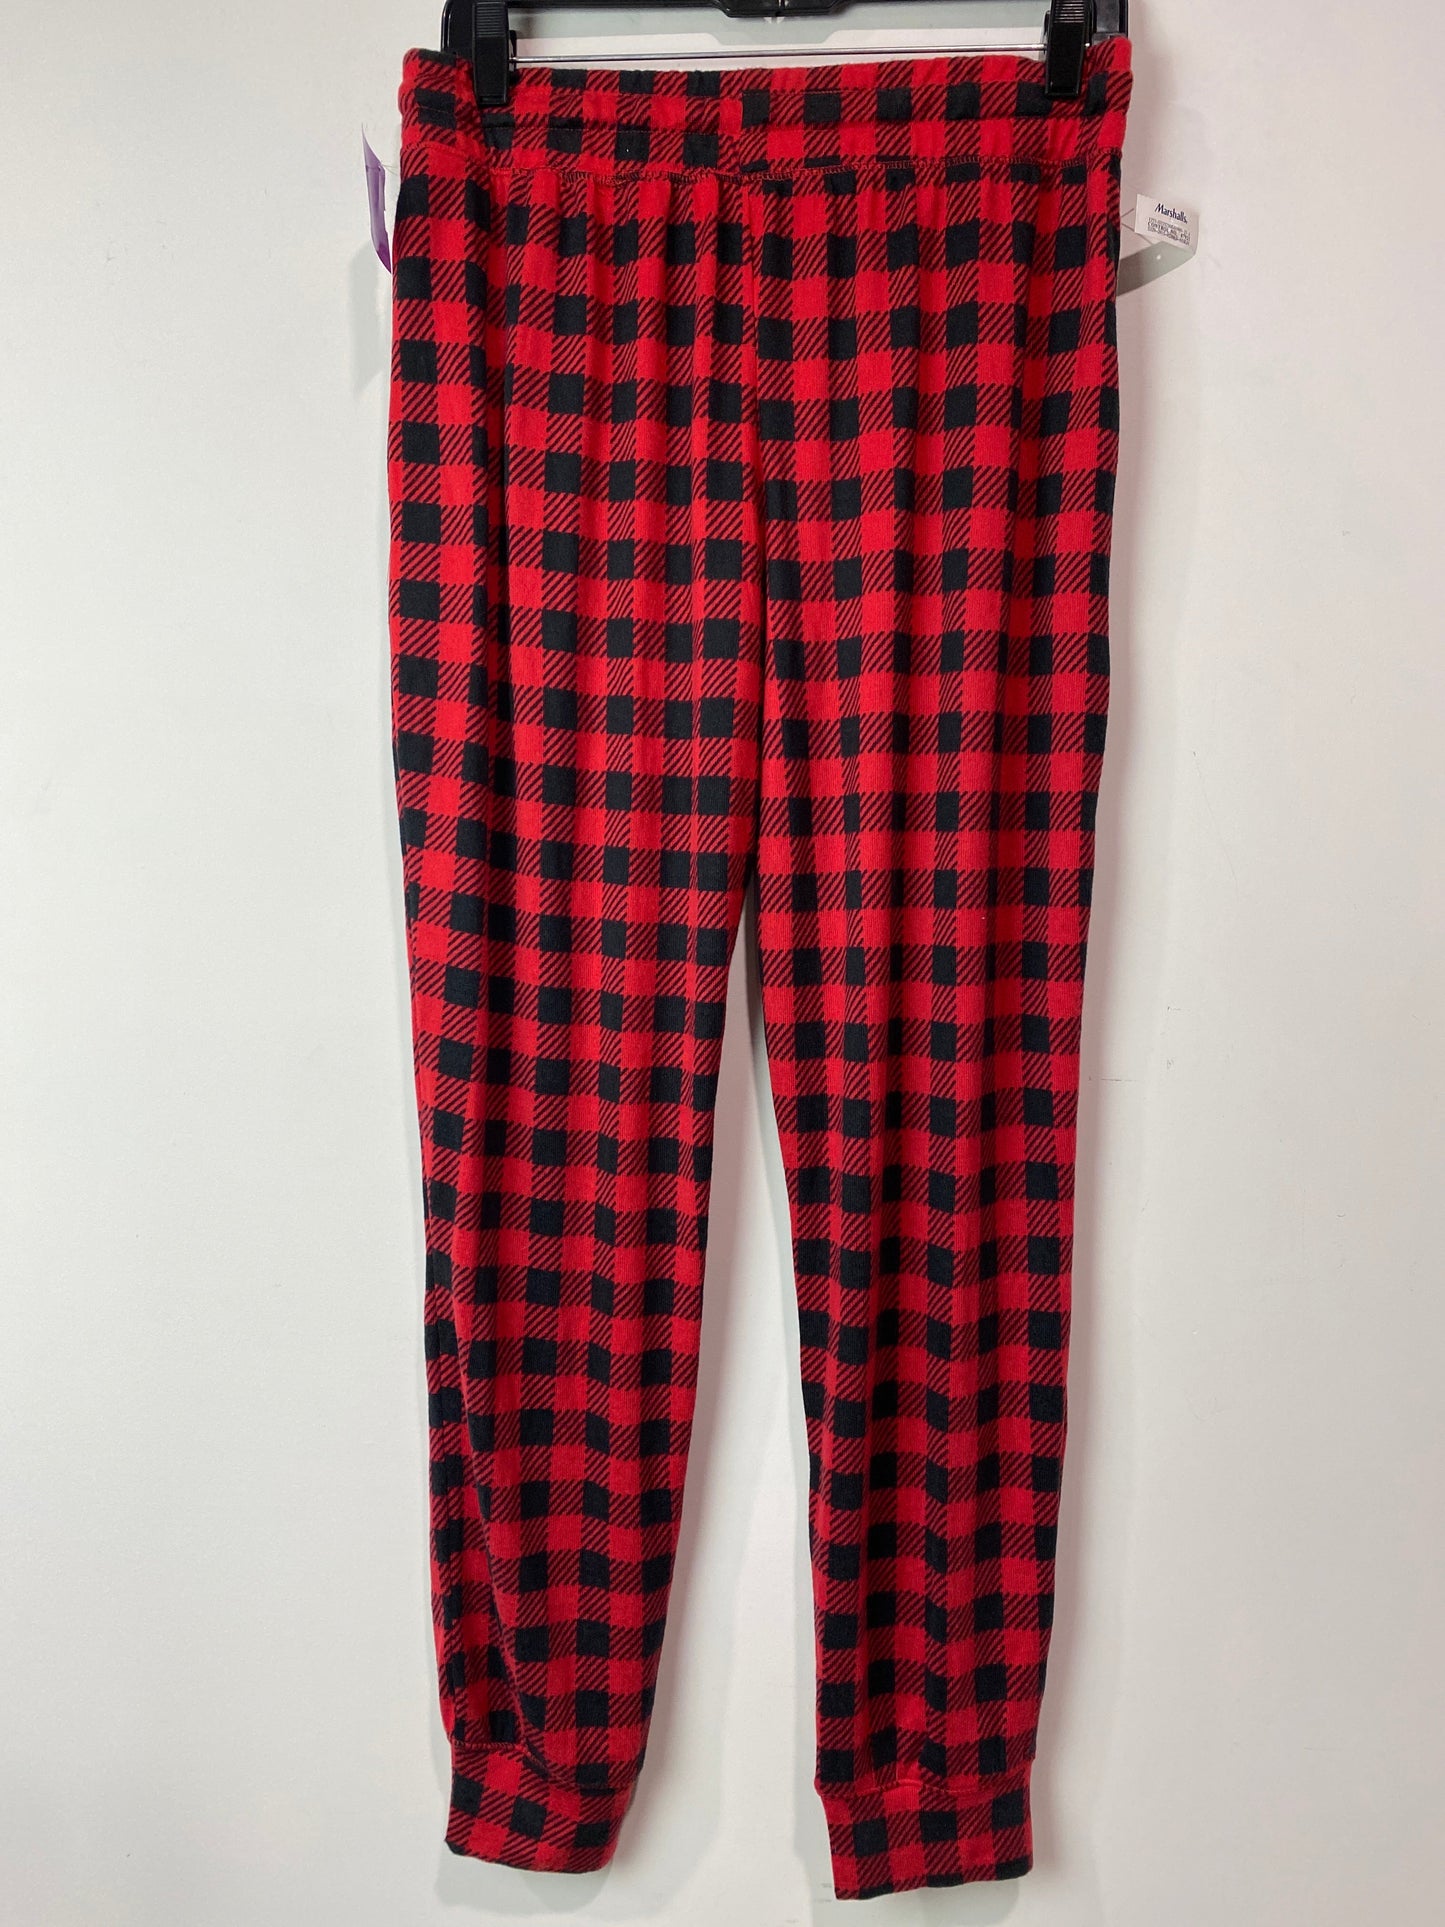 Pajama Pants By Jaclyn Smith  Size: M